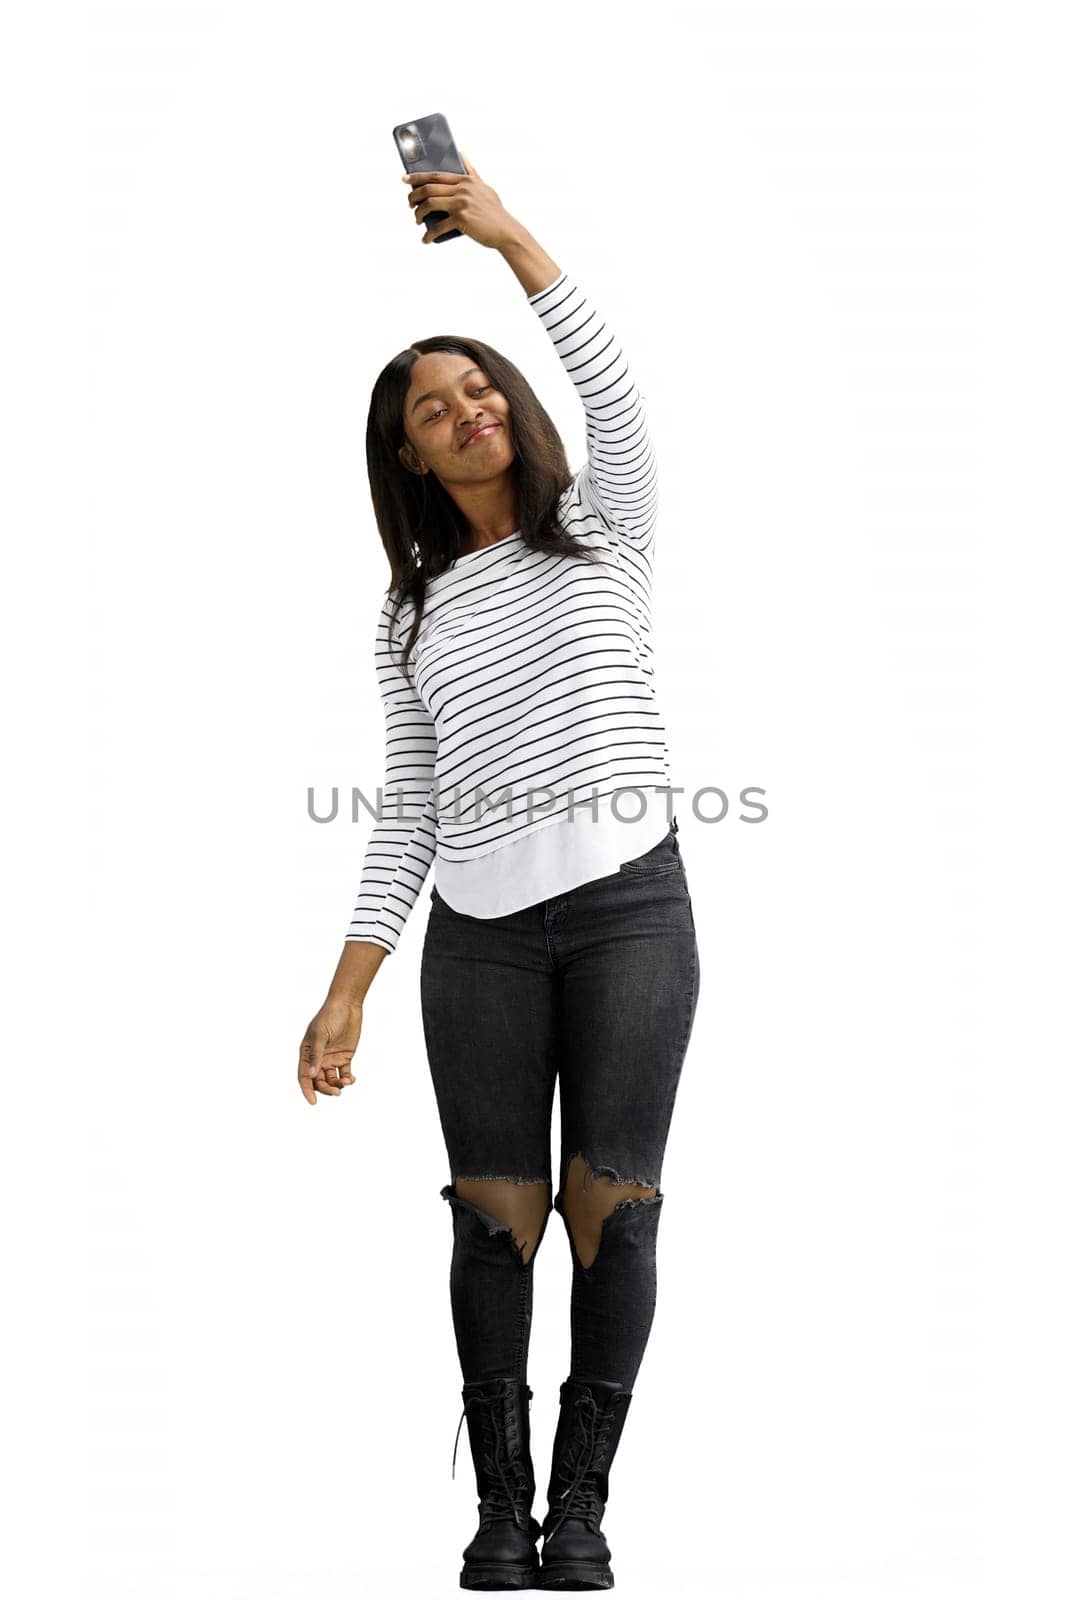 A woman, on a white background, in full height, waving her phone by Prosto